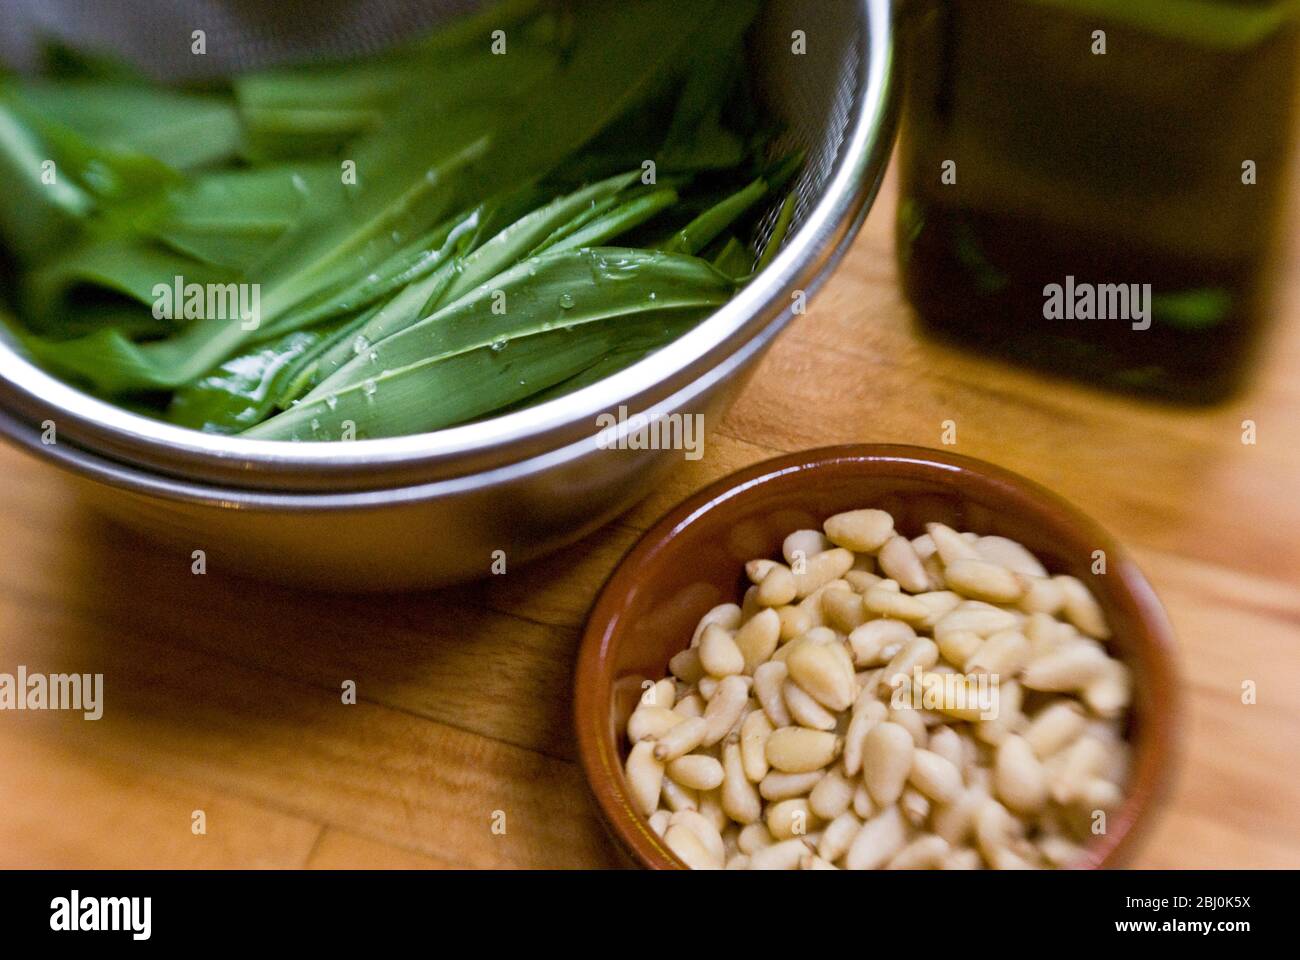 Ingredients for wild garlic pesto, washed wild garlic leaves, pinenuts in little bowl. Shot with Lensbaby lens for blurred edge effect. - Stock Photo